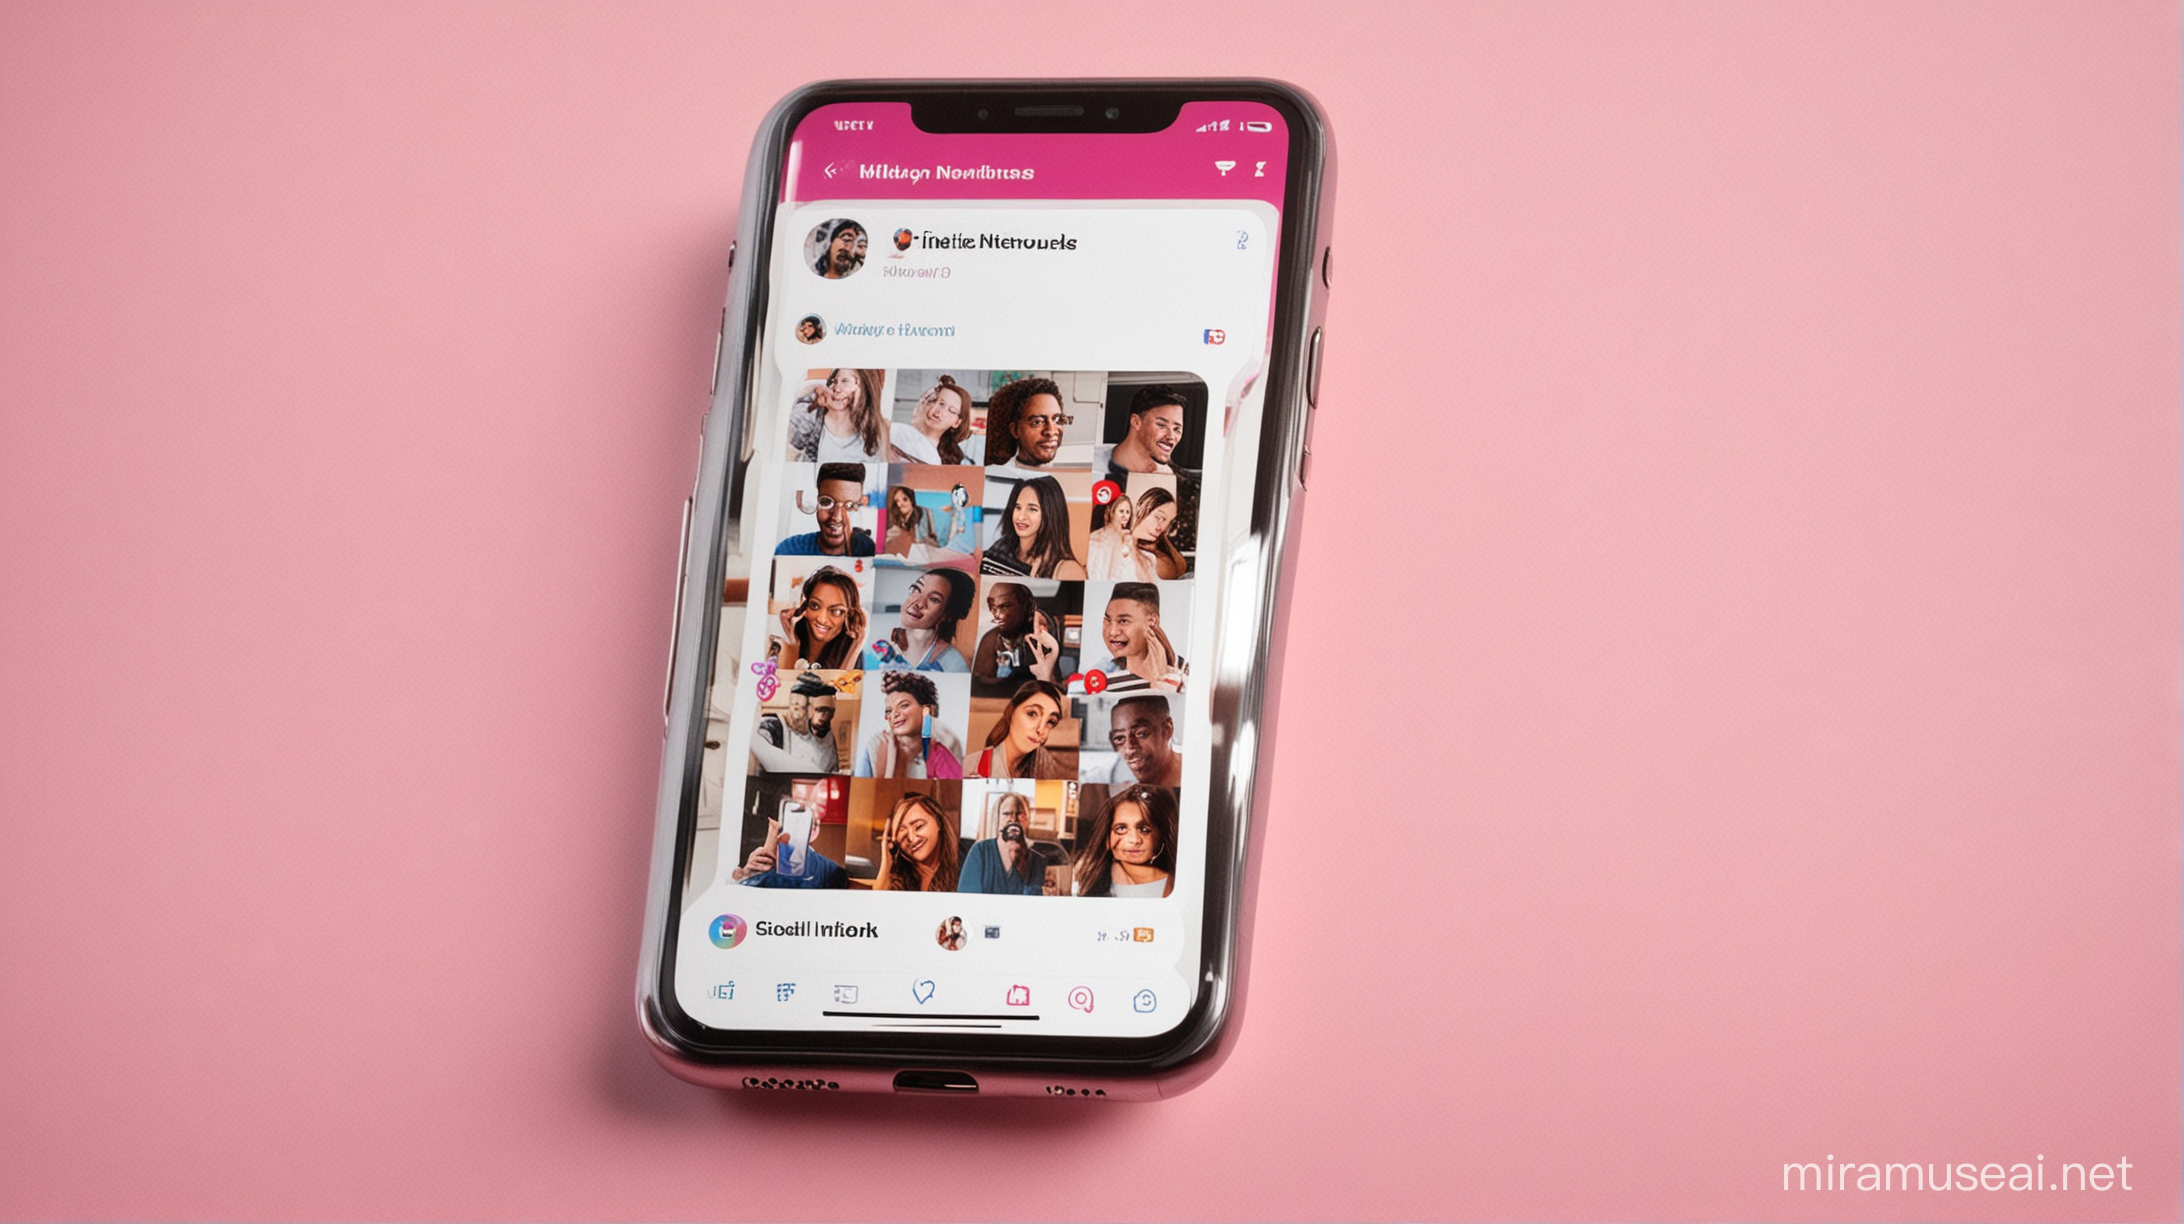 Smartphone Screen with TikTok and Instagram Social Networks